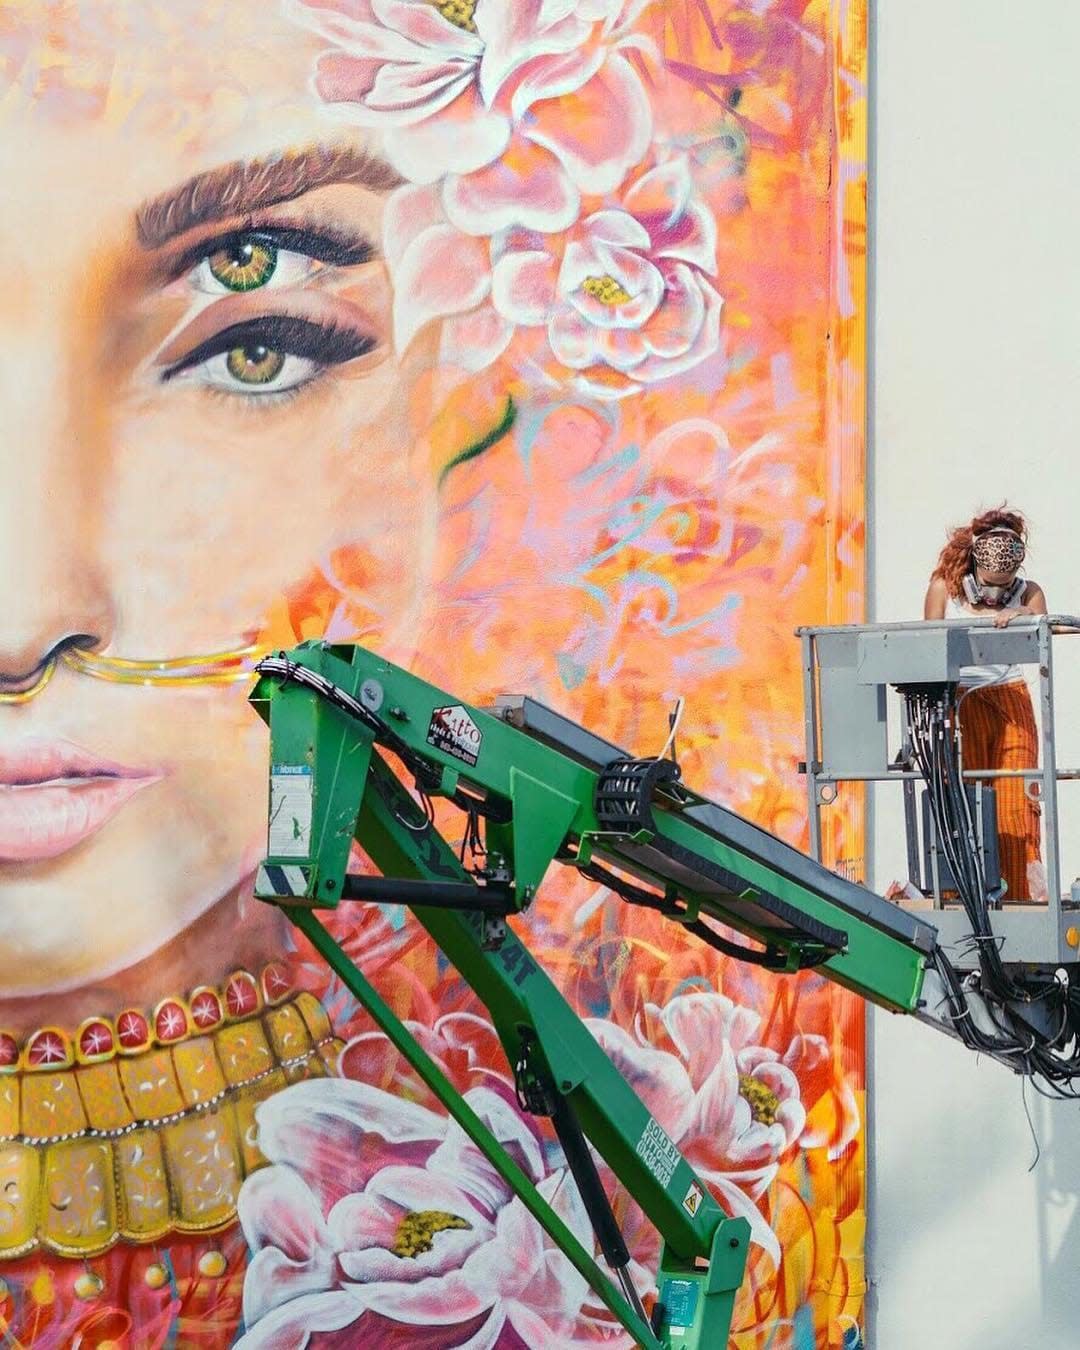 Gabriela Jaxon is perhaps best known for her mural on the Thom Downs Antiques building in Lakeland. She was invited to participate in a Latino-themed gathering for creators in Los Angeles.